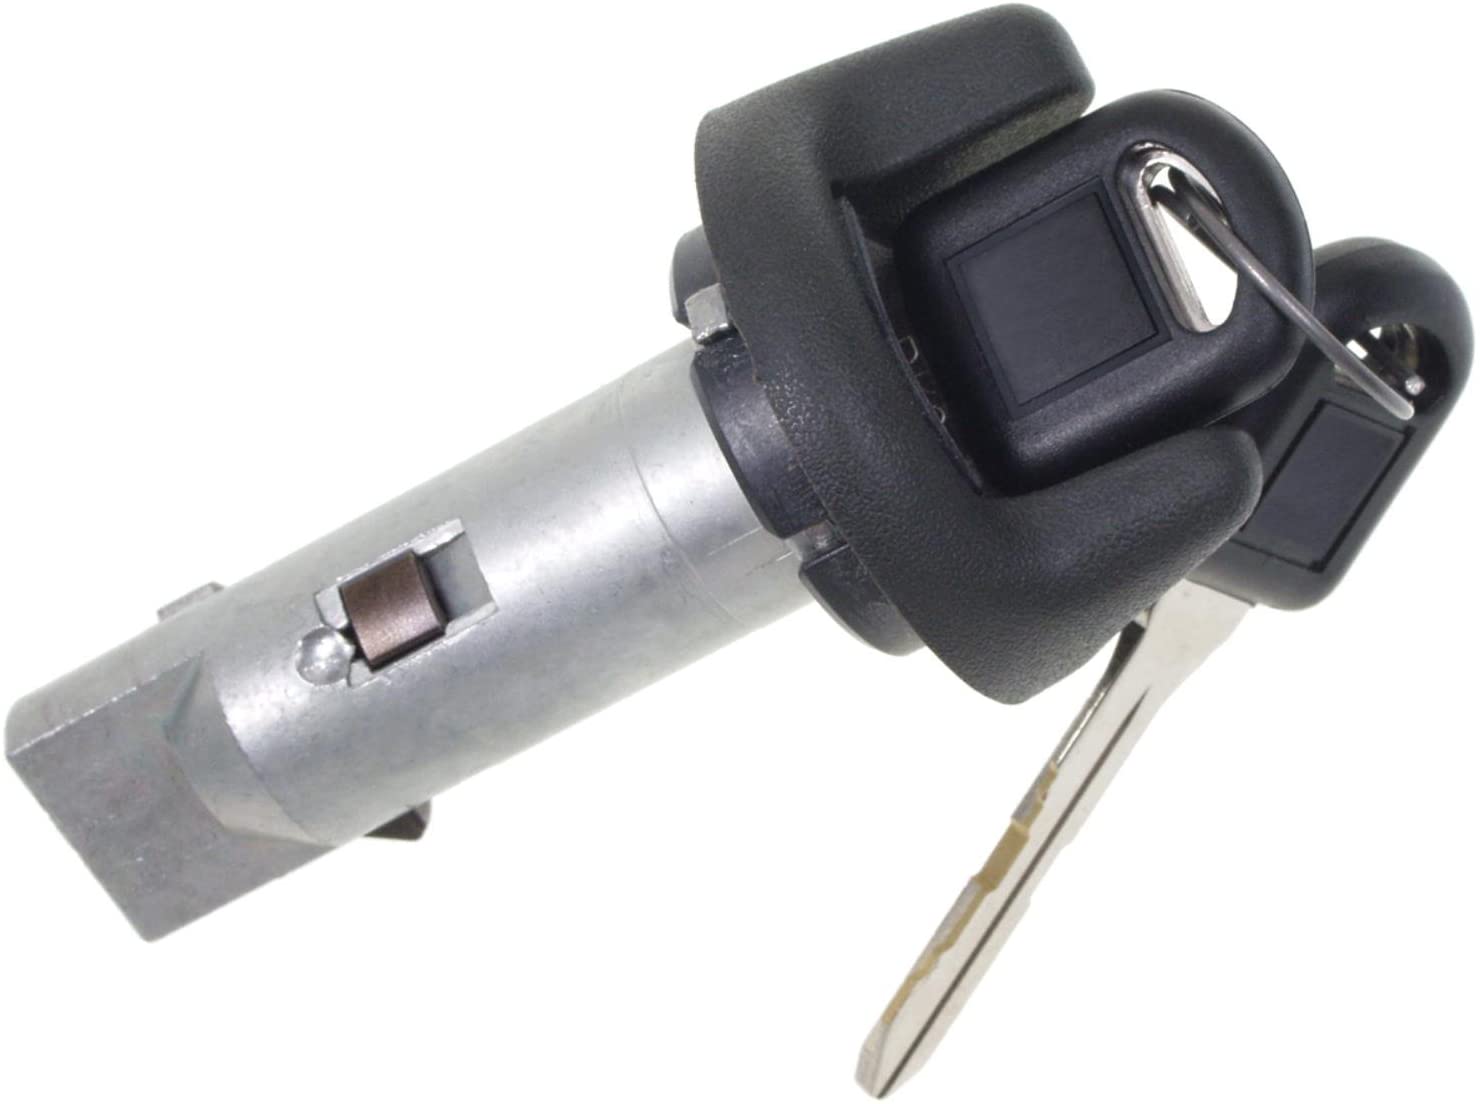 ACDelco D1496G Professional Ignition Lock Cylinder with Key